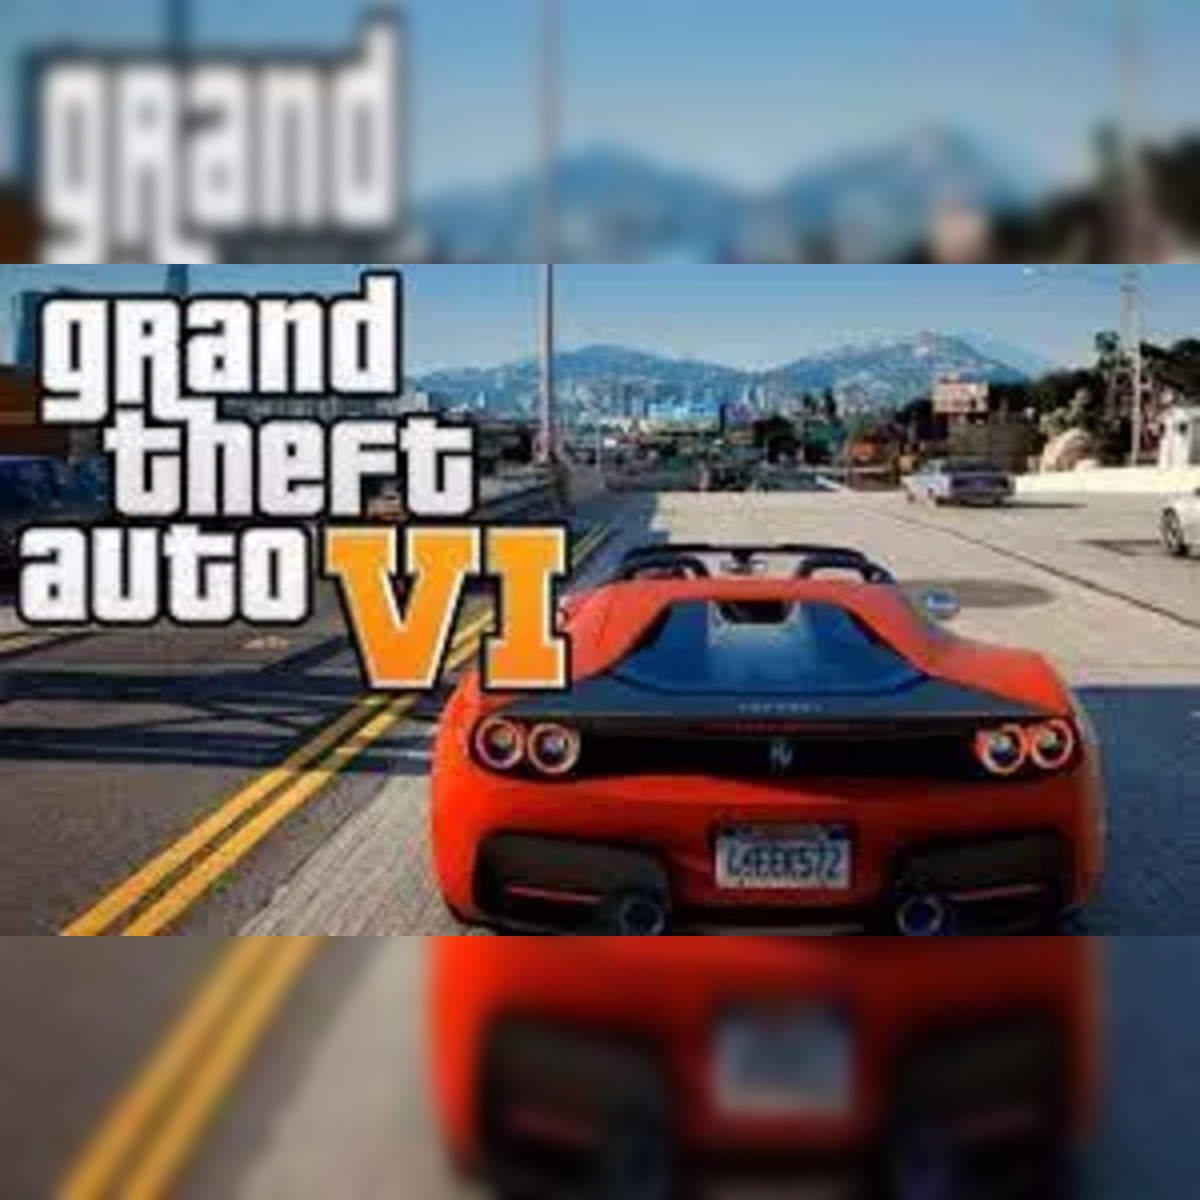 Next Grand Theft Auto Installment Officially Confirmed